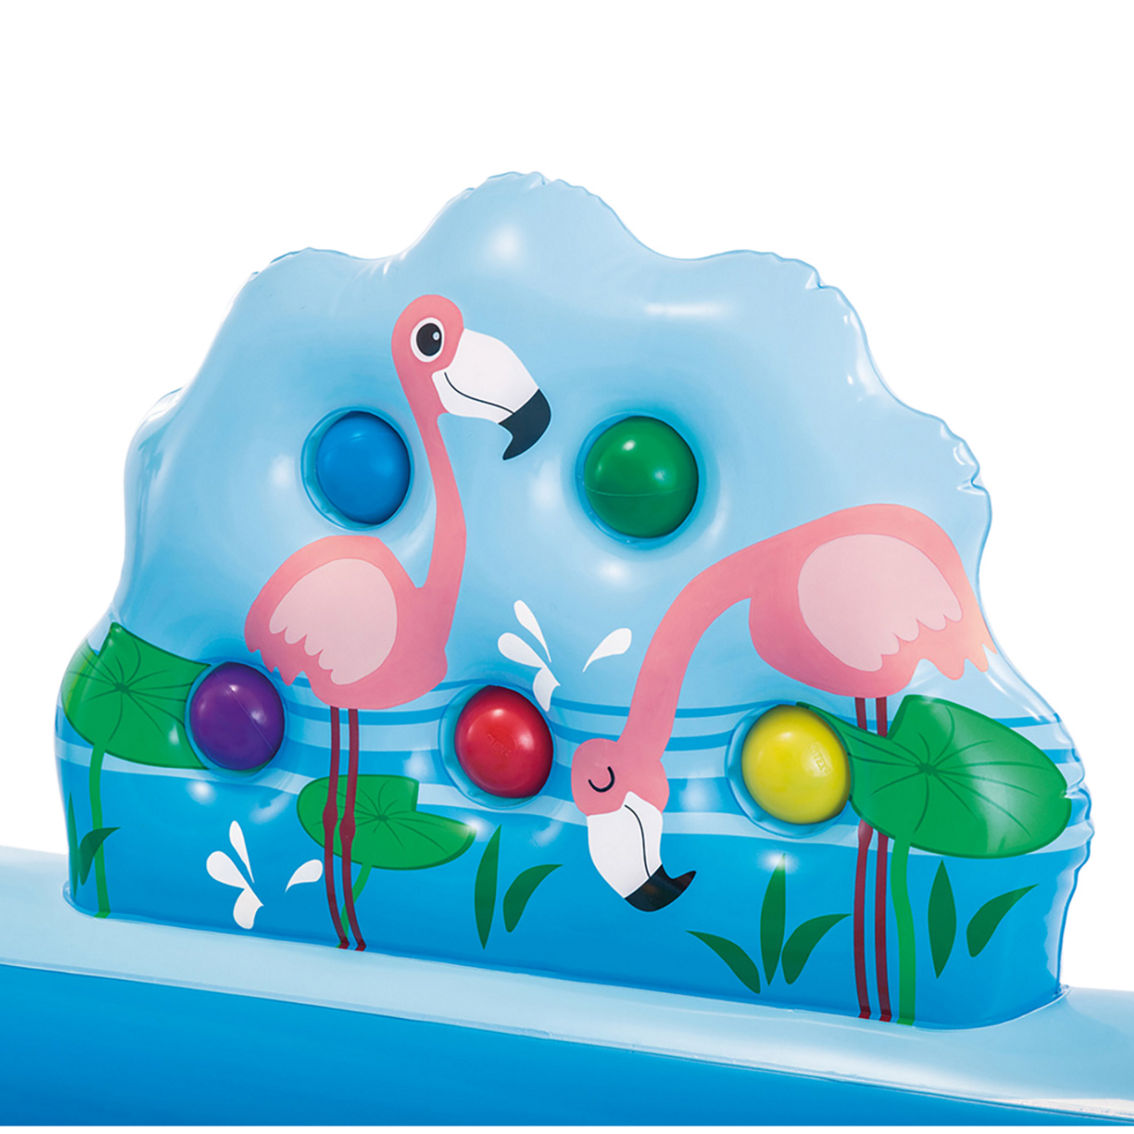 Intex Jungle Adventure Inflatable Pool Play Center - Image 6 of 7